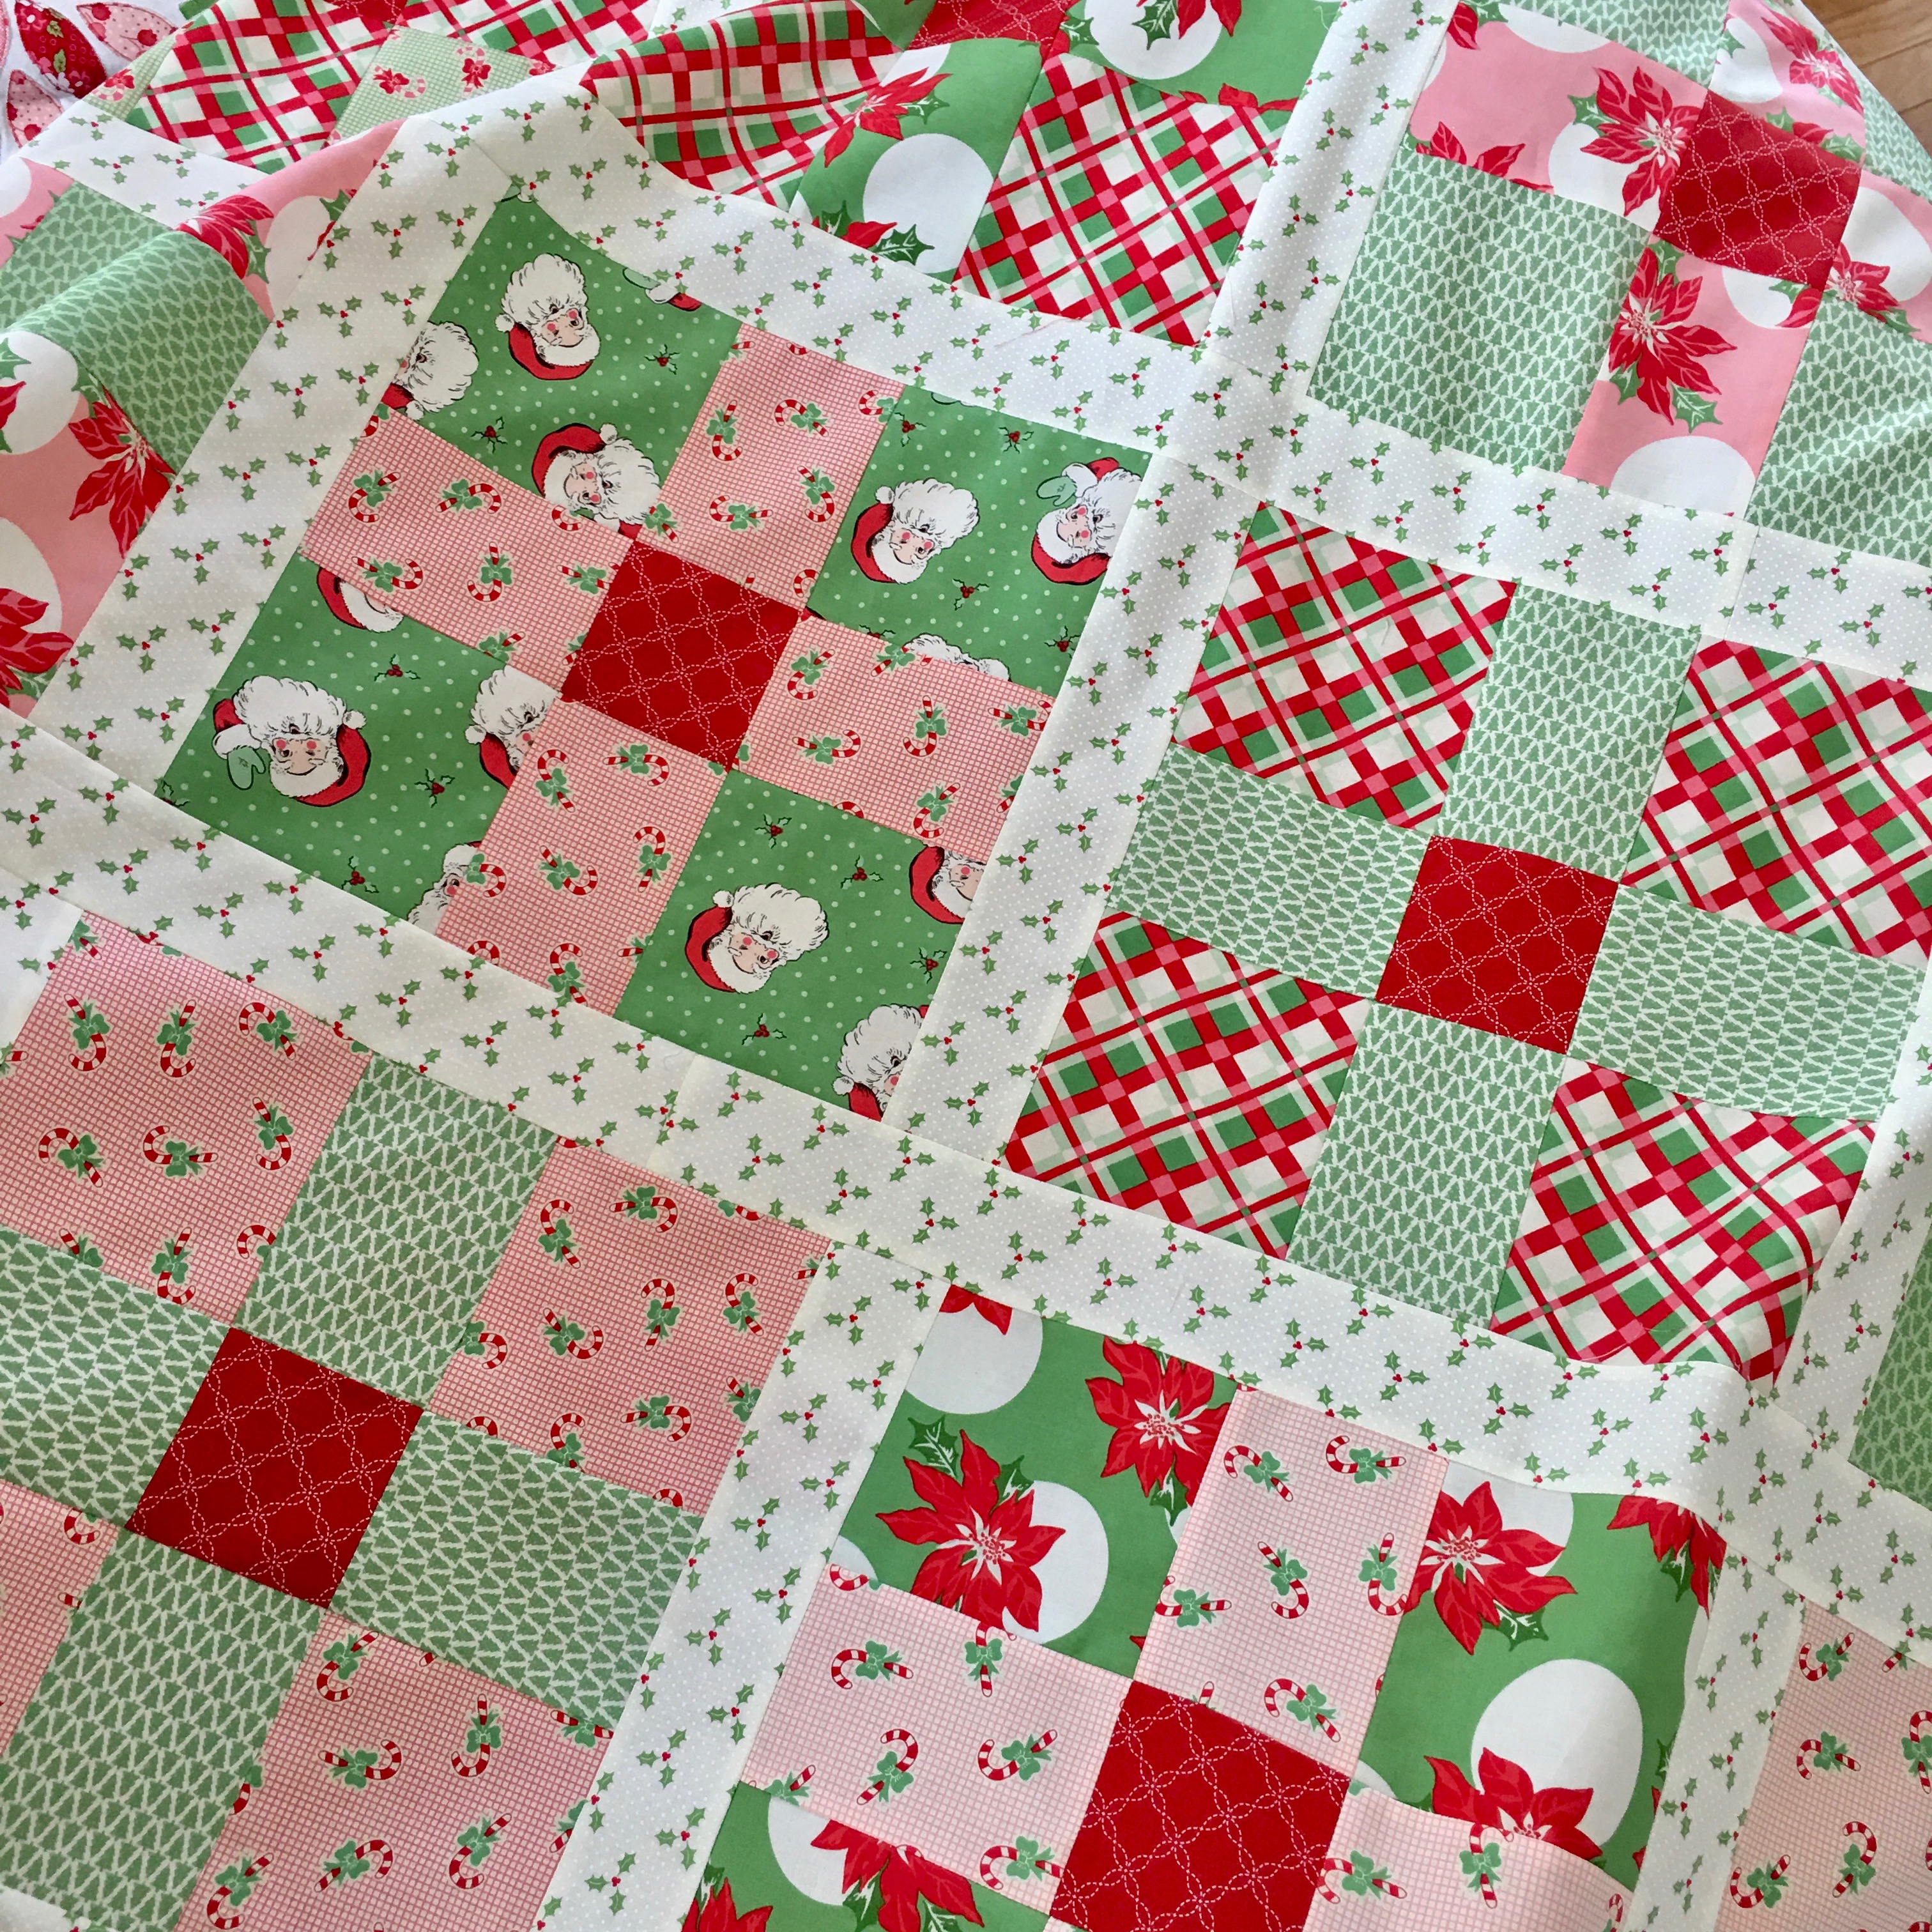 Uneven 9-Patch Quilt Pattern featuring Swell Christmas